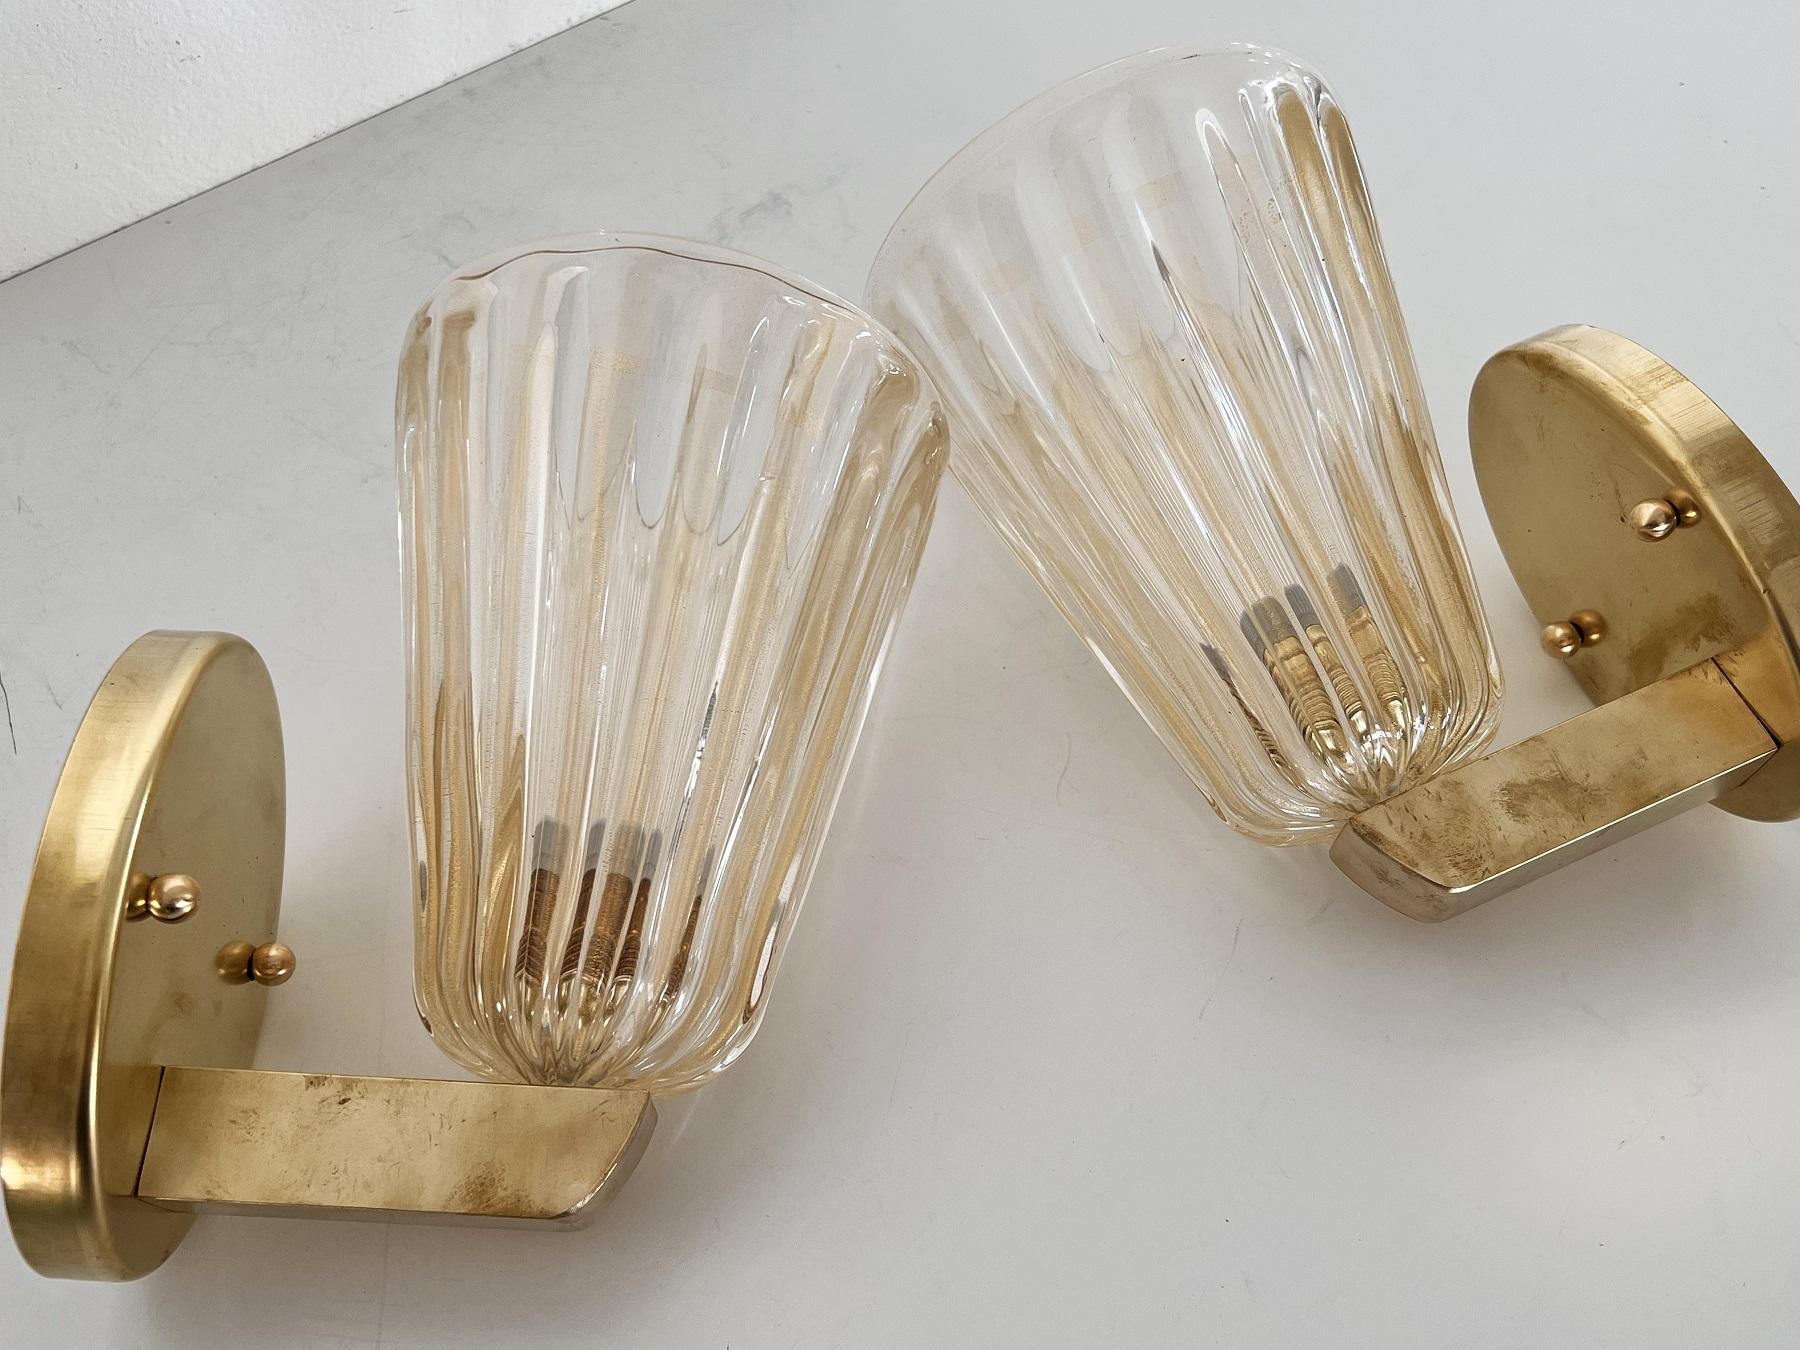 Italian Brass and Murano Glass Wall Lights or Sconces in Art Deco Style, 1990s For Sale 1